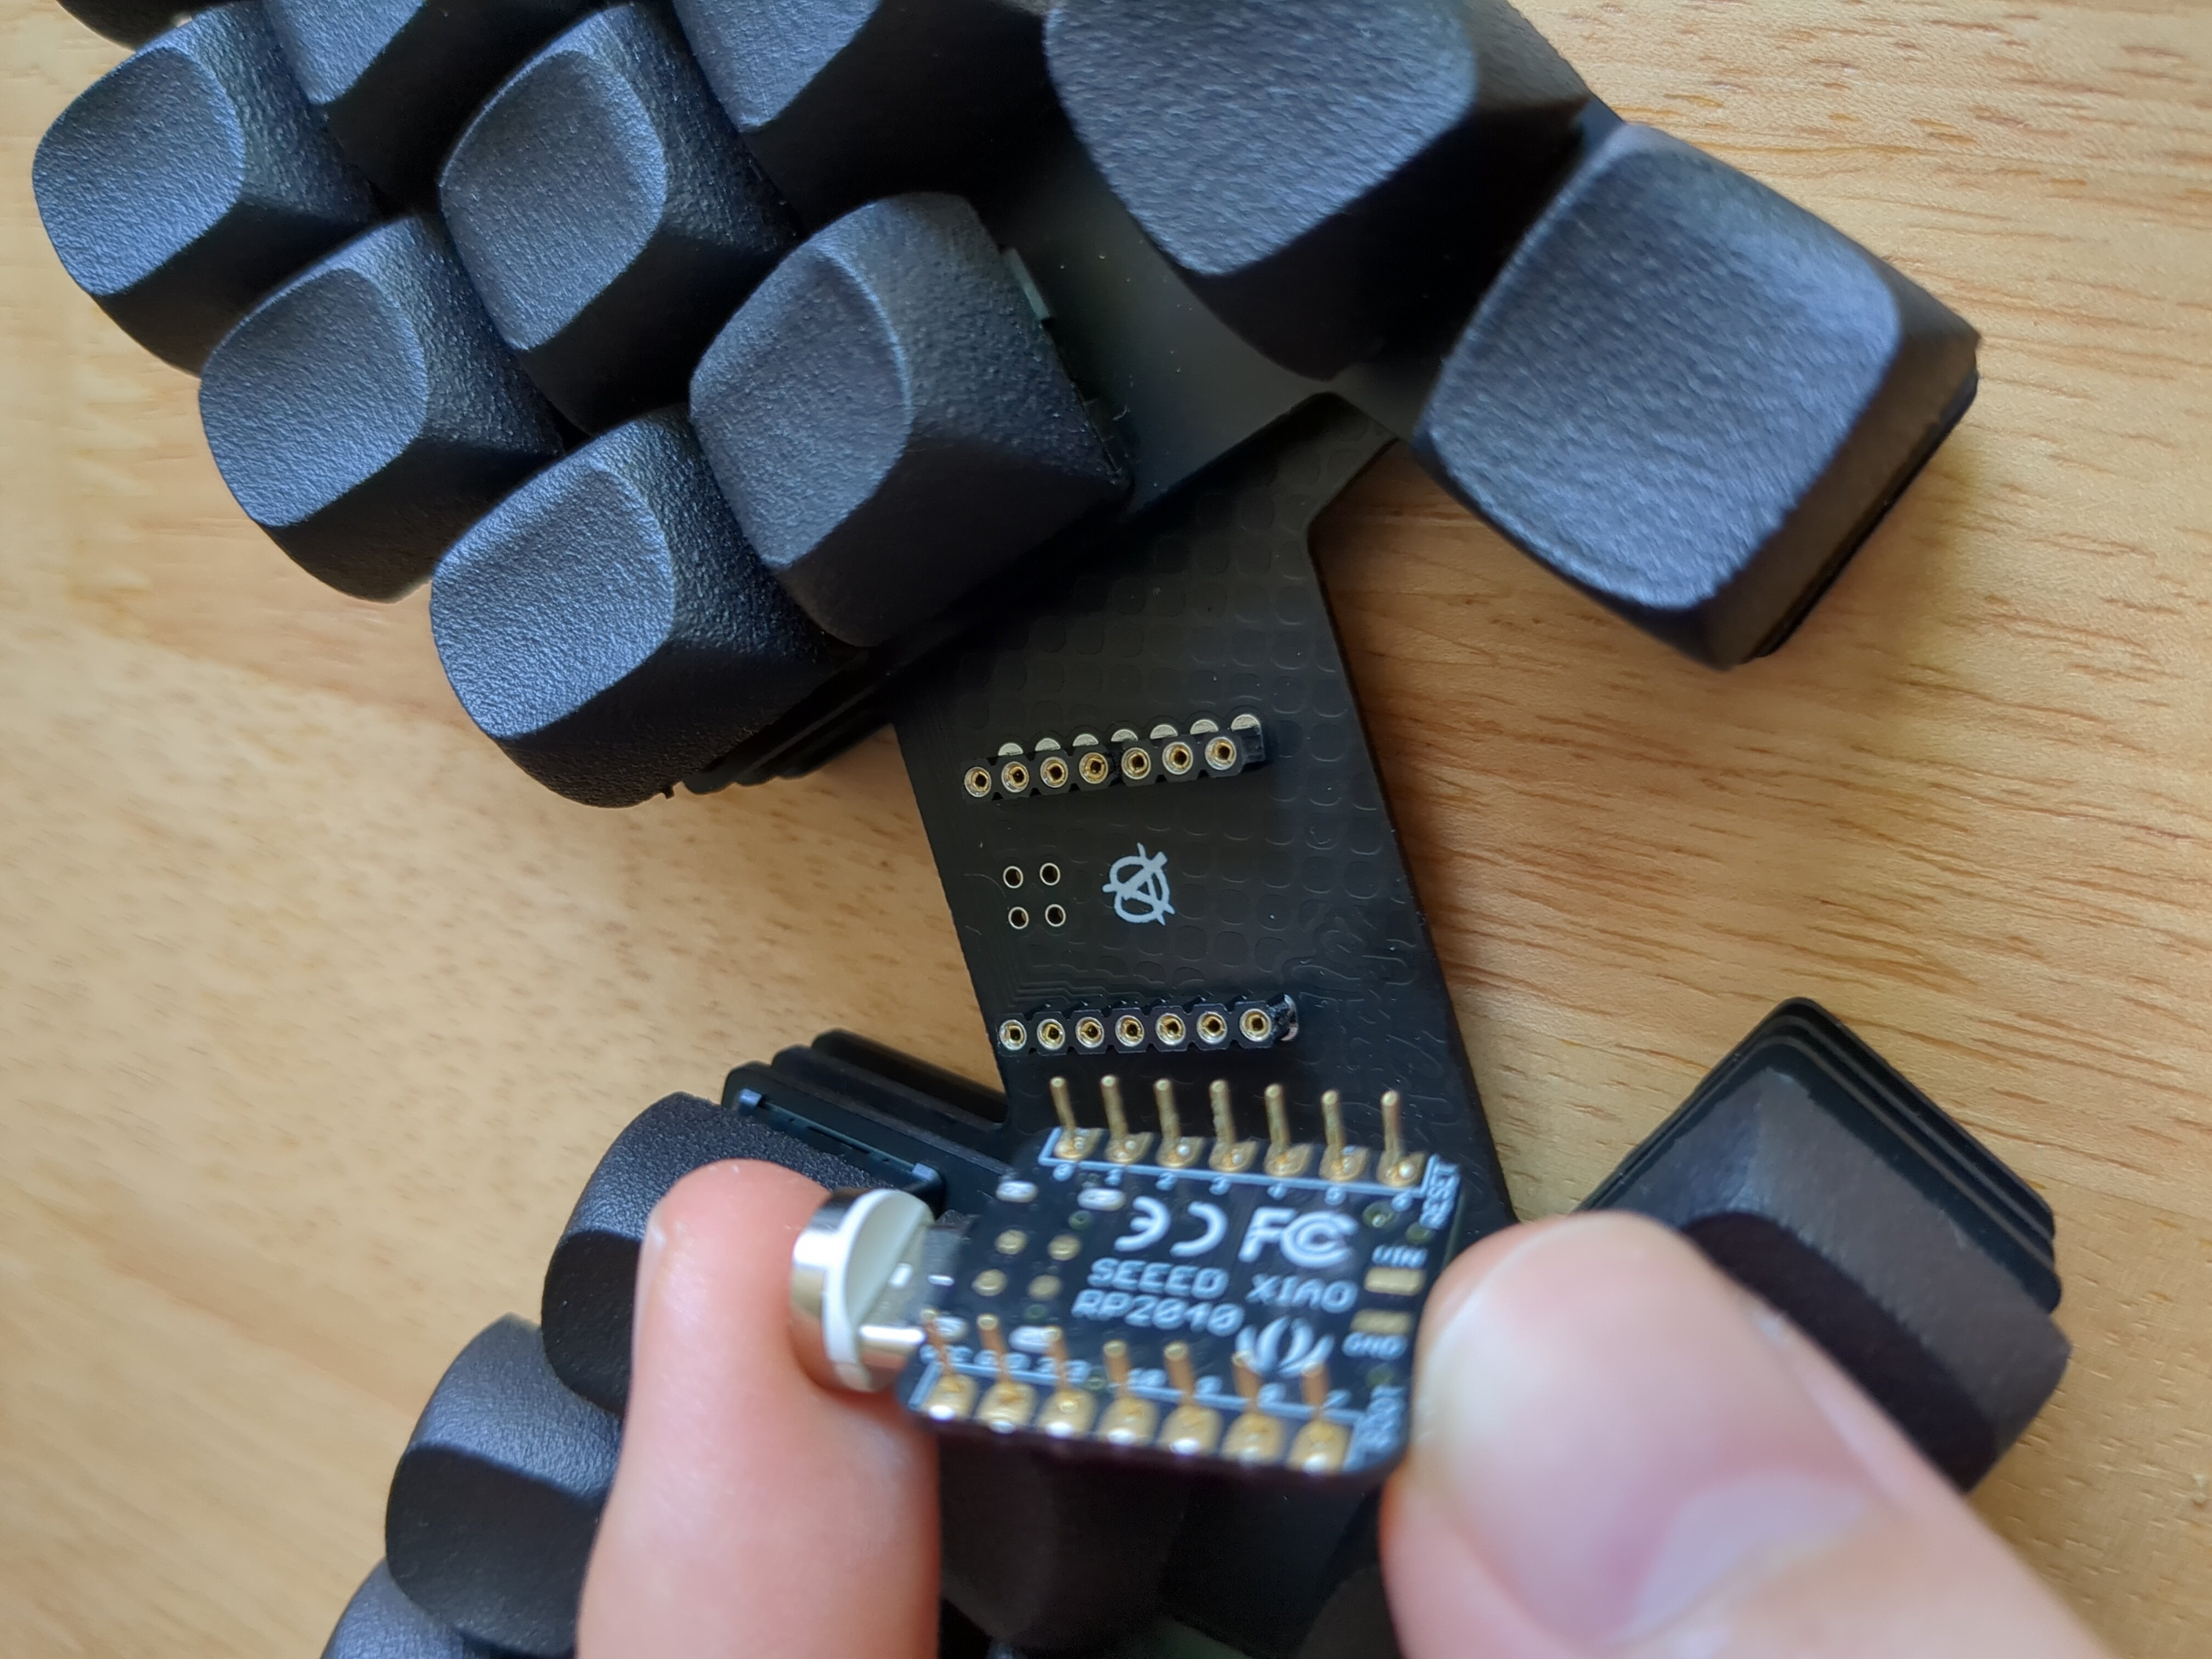 Hot-swappable sockets on board, pins on controller